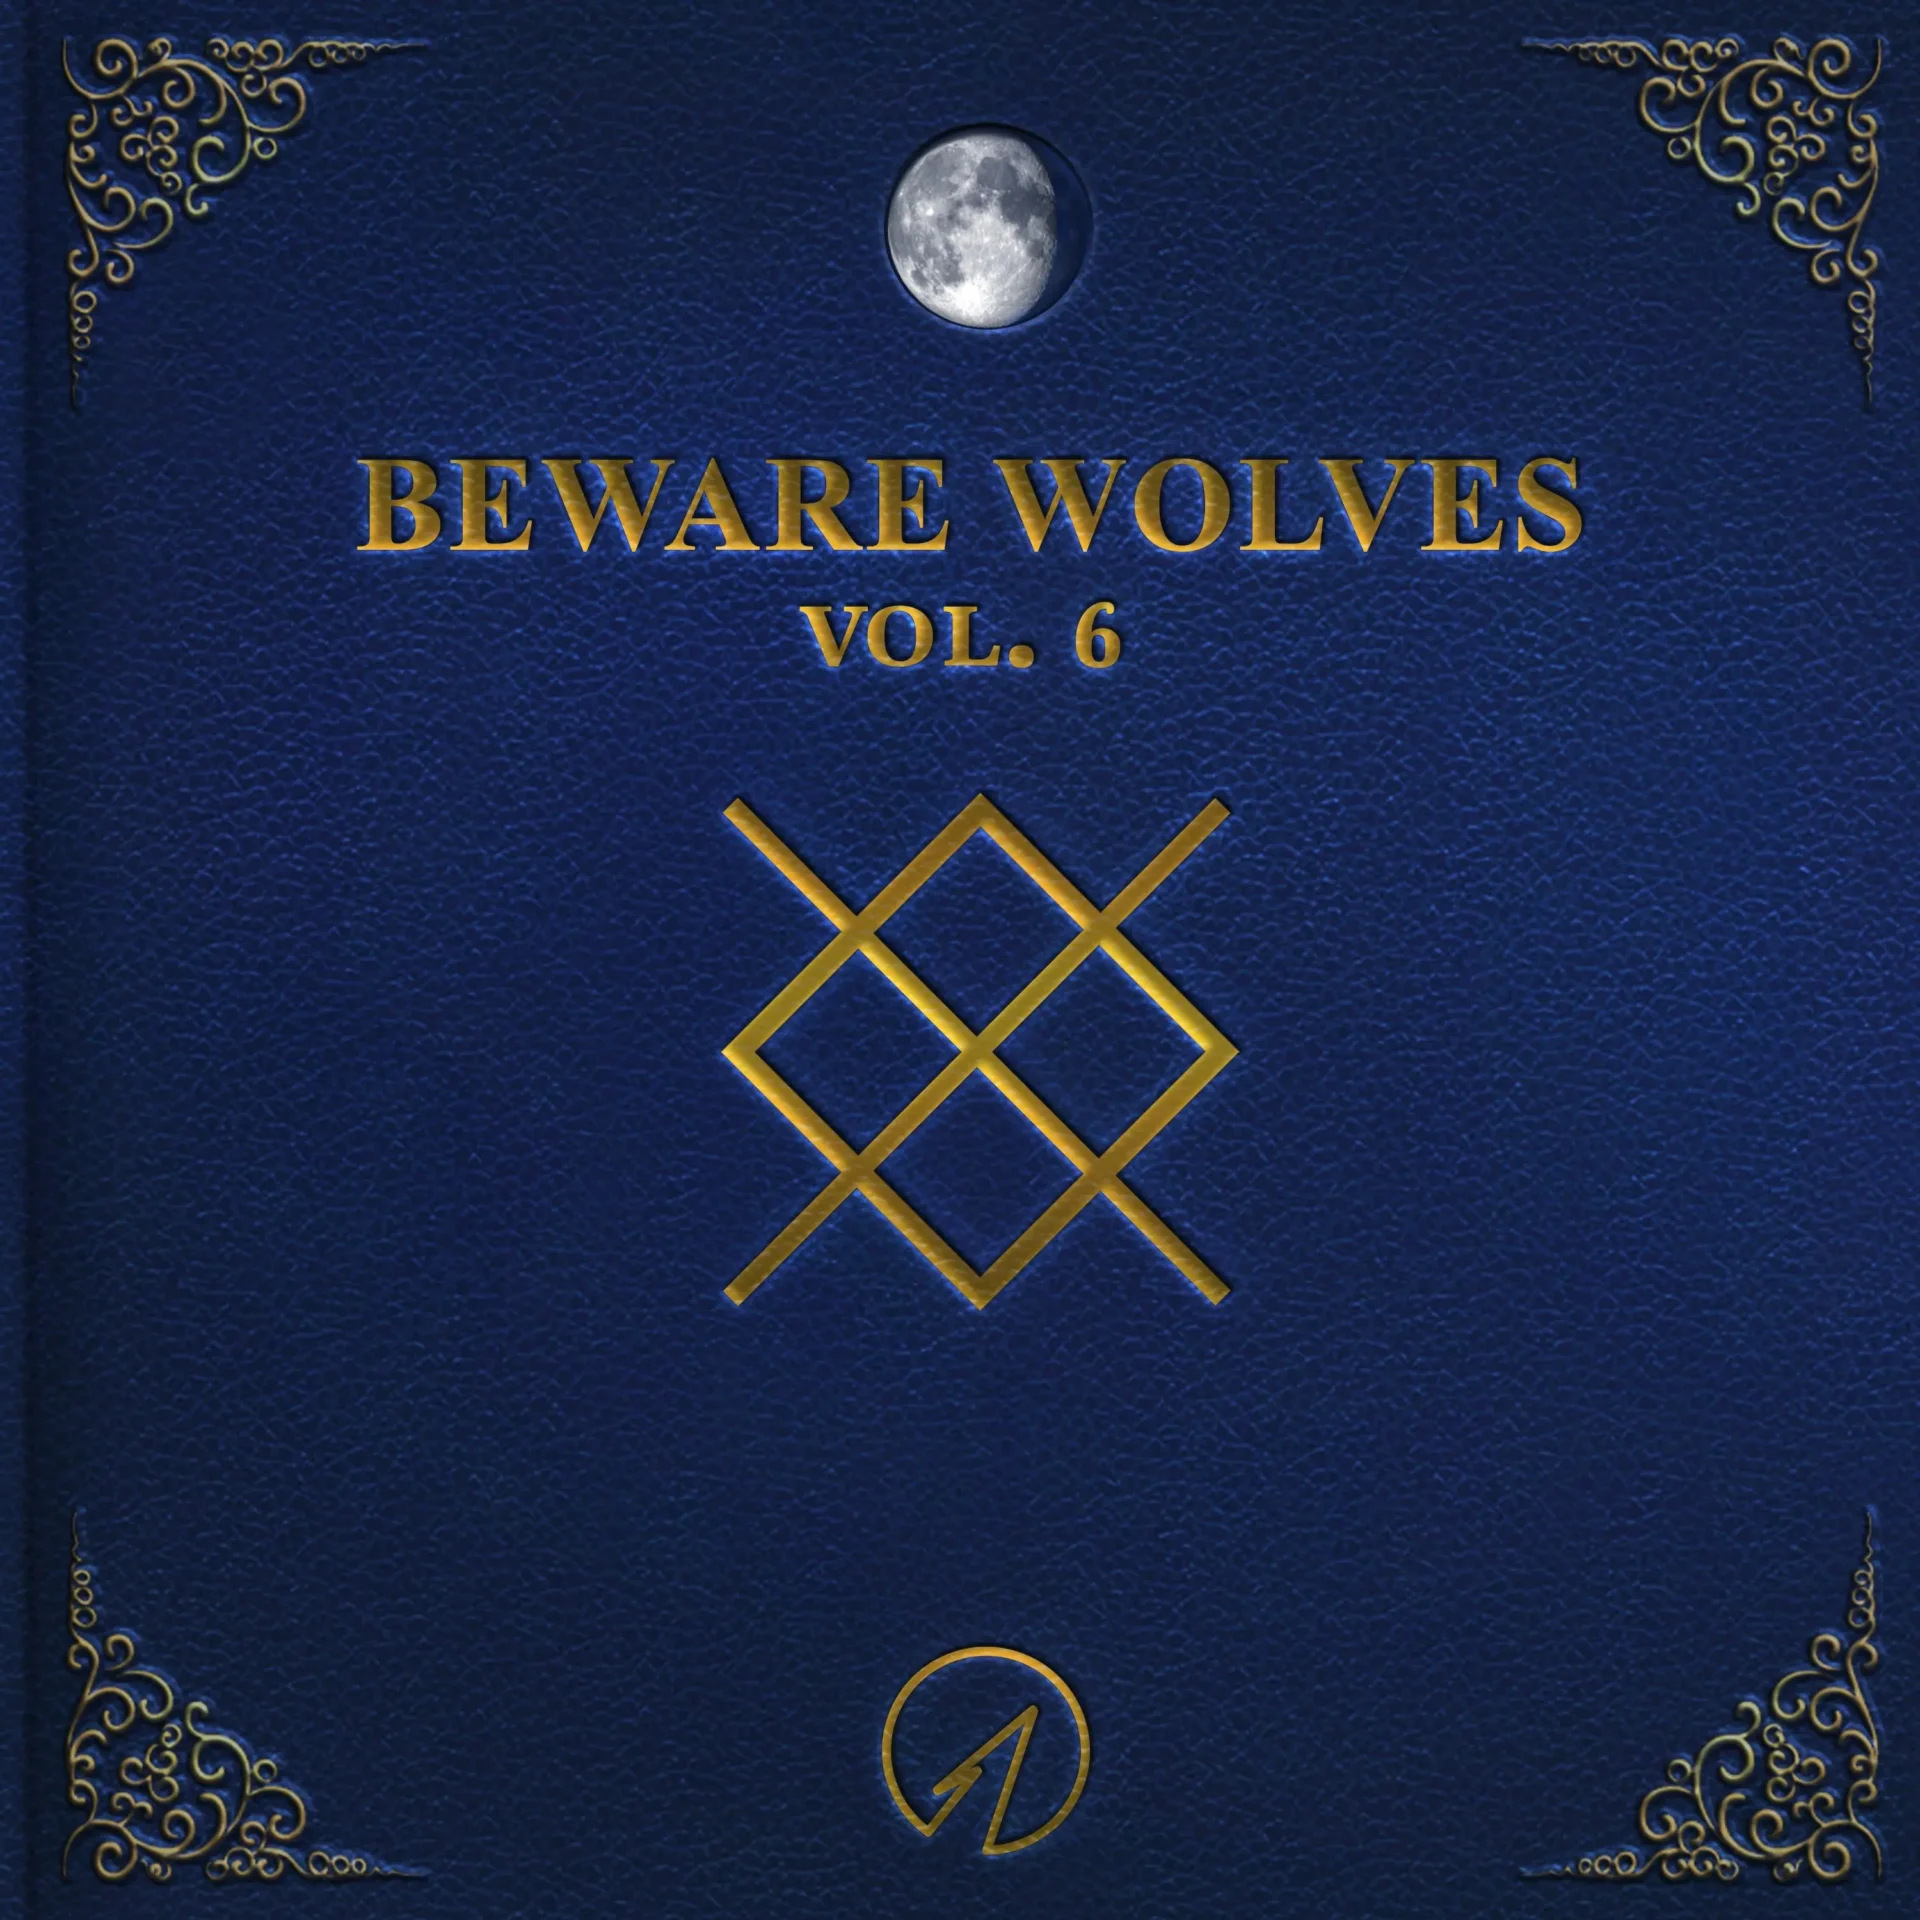 Beware Wolves Volume 6 by Beware Wolves: Review